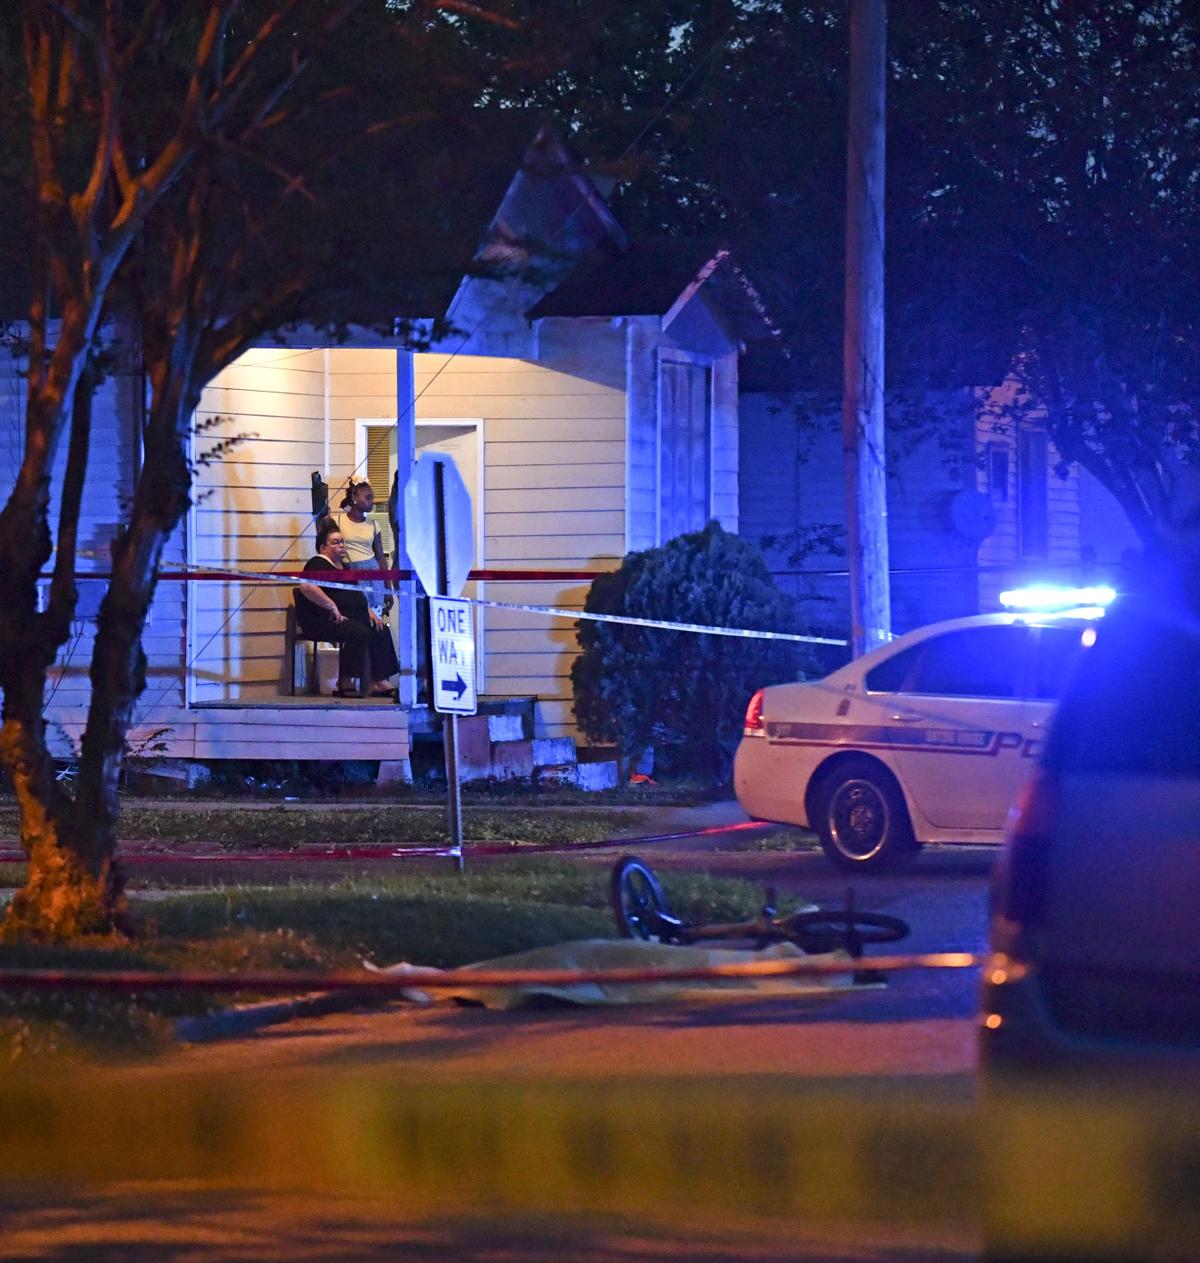 Teen Idd As Victim In Fatal South 18th Street Shooting